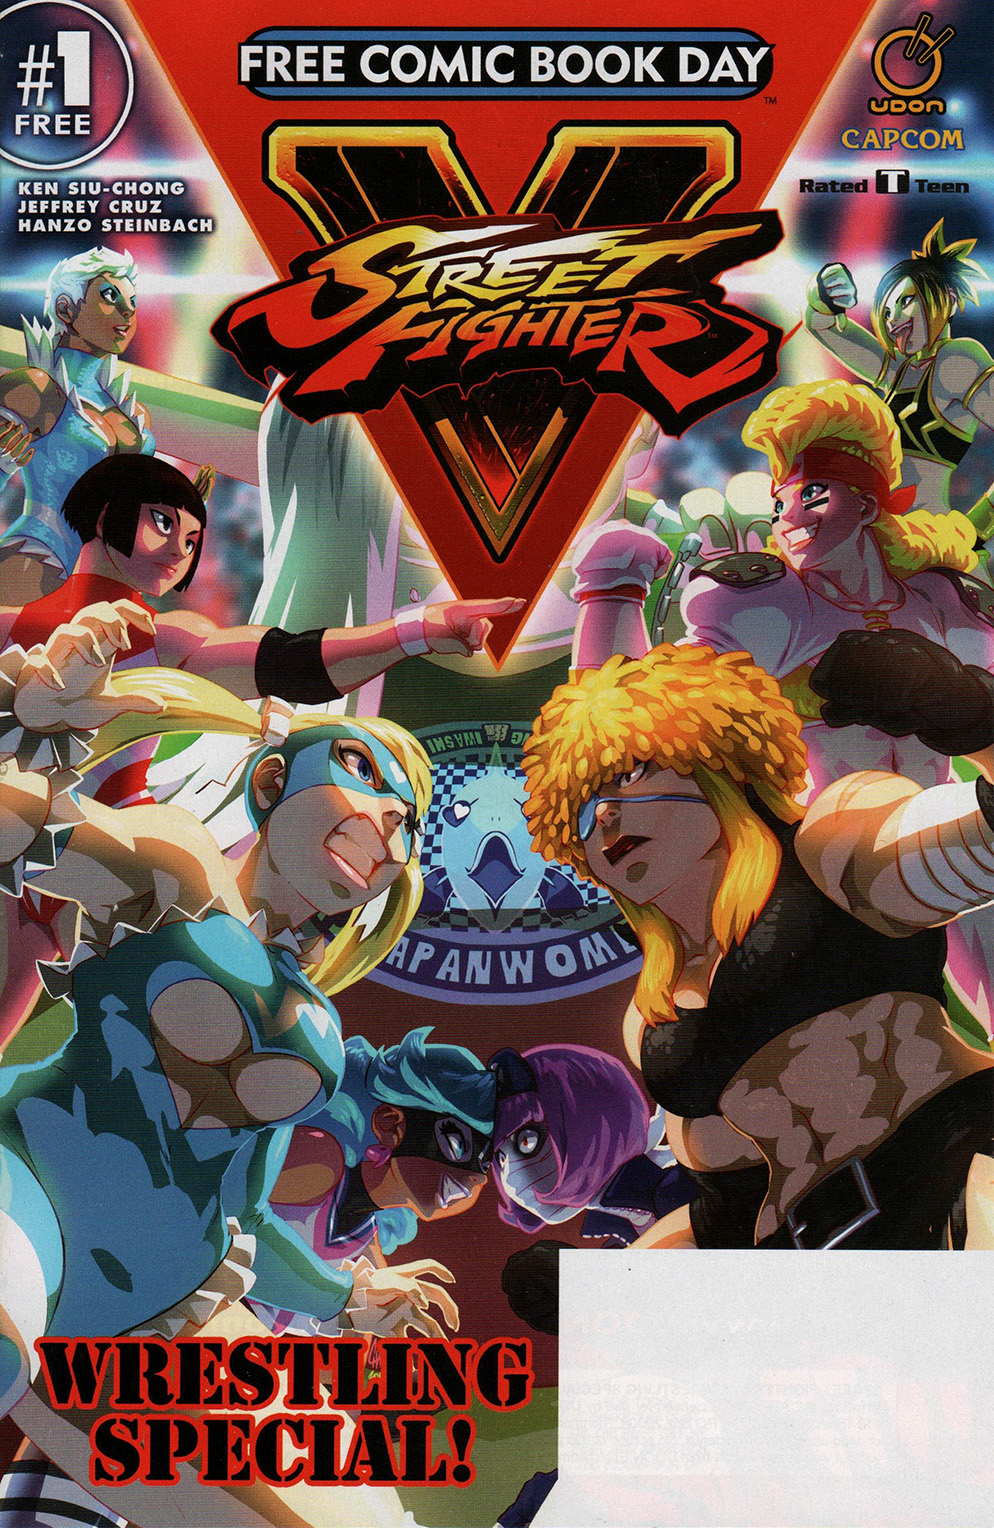 Read online Free Comic Book Day 2017 comic -  Issue # Street Fighter V - Wrestling Special - 1